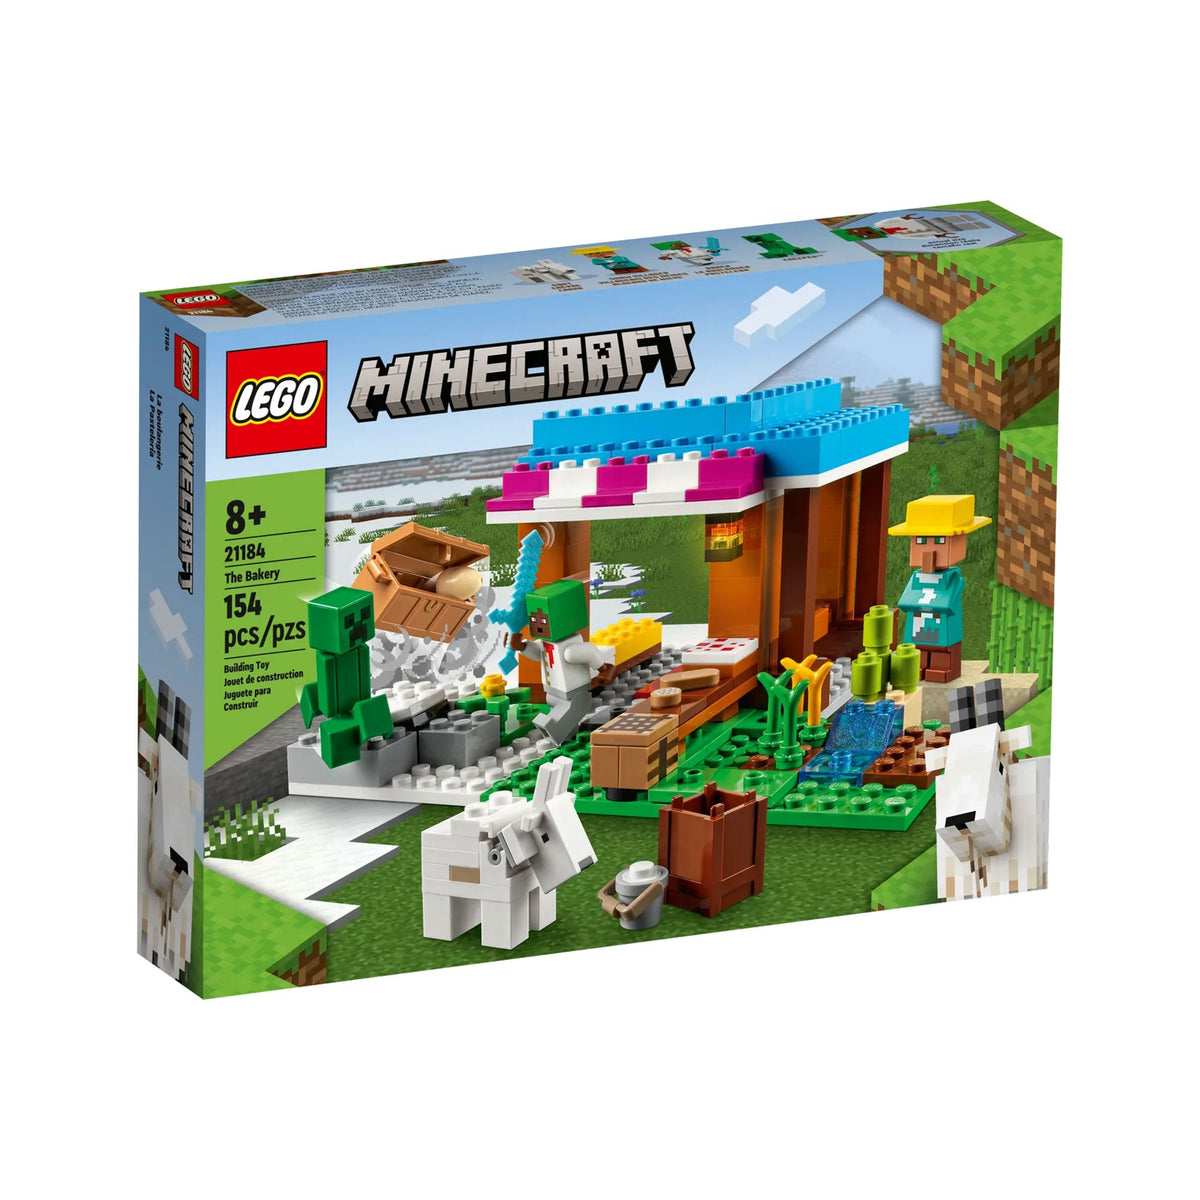 LEGO Toys & Games LEGO Minecraft The Bakery, 21184, Ages 8+, 154 Pieces 673419358545